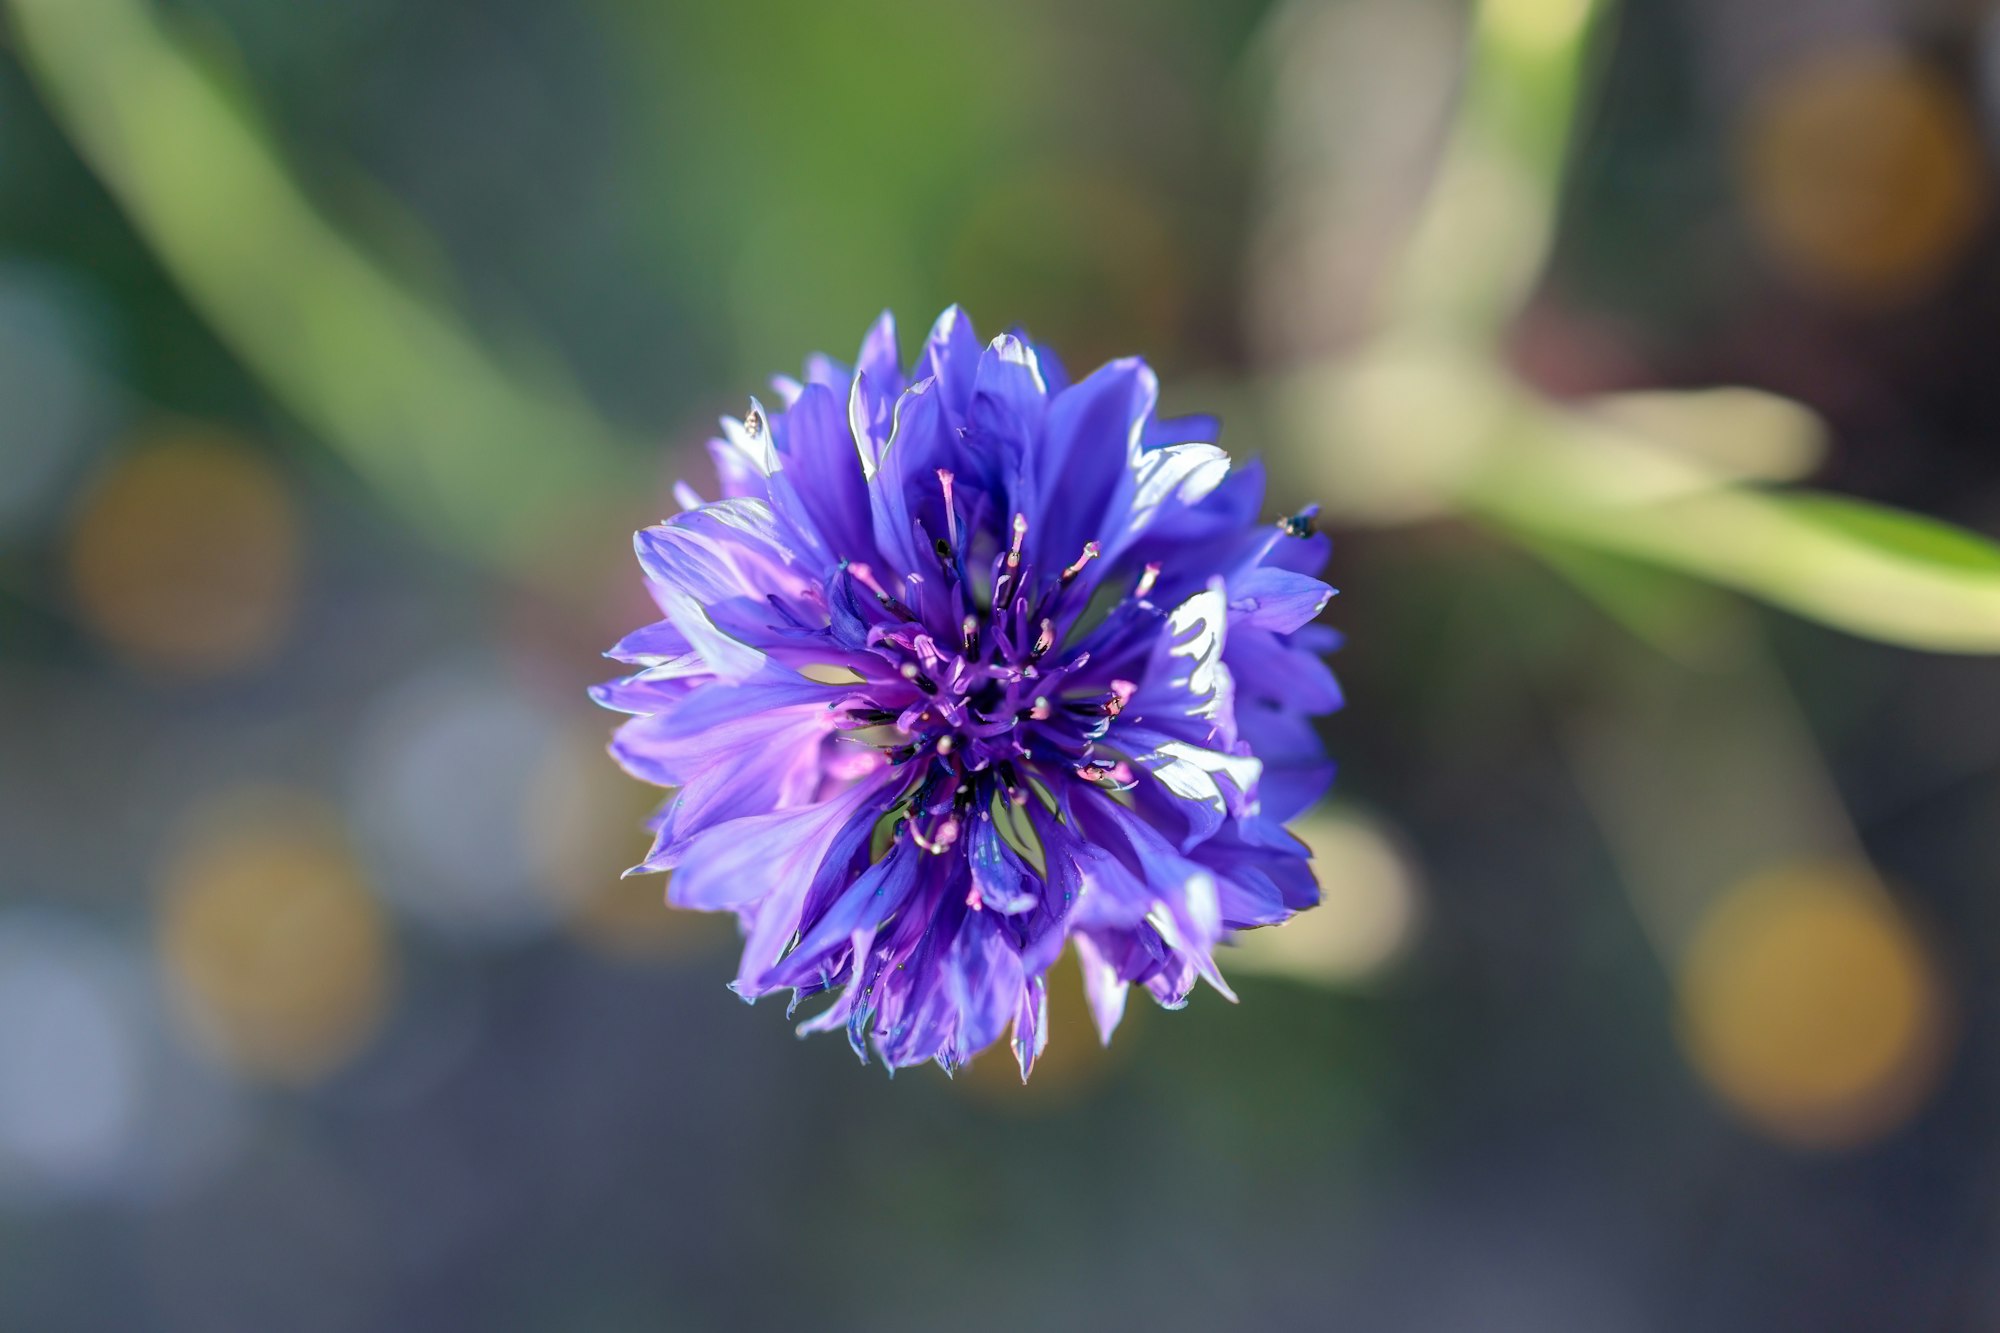 A stunning close-up view from the top of a vibrant blue cornflower, surrounded by a captivating bokeh of soft, blurred lights. The image encapsulates the delicate beauty of the flower, with the dreamy bokeh creating a mesmerizing background